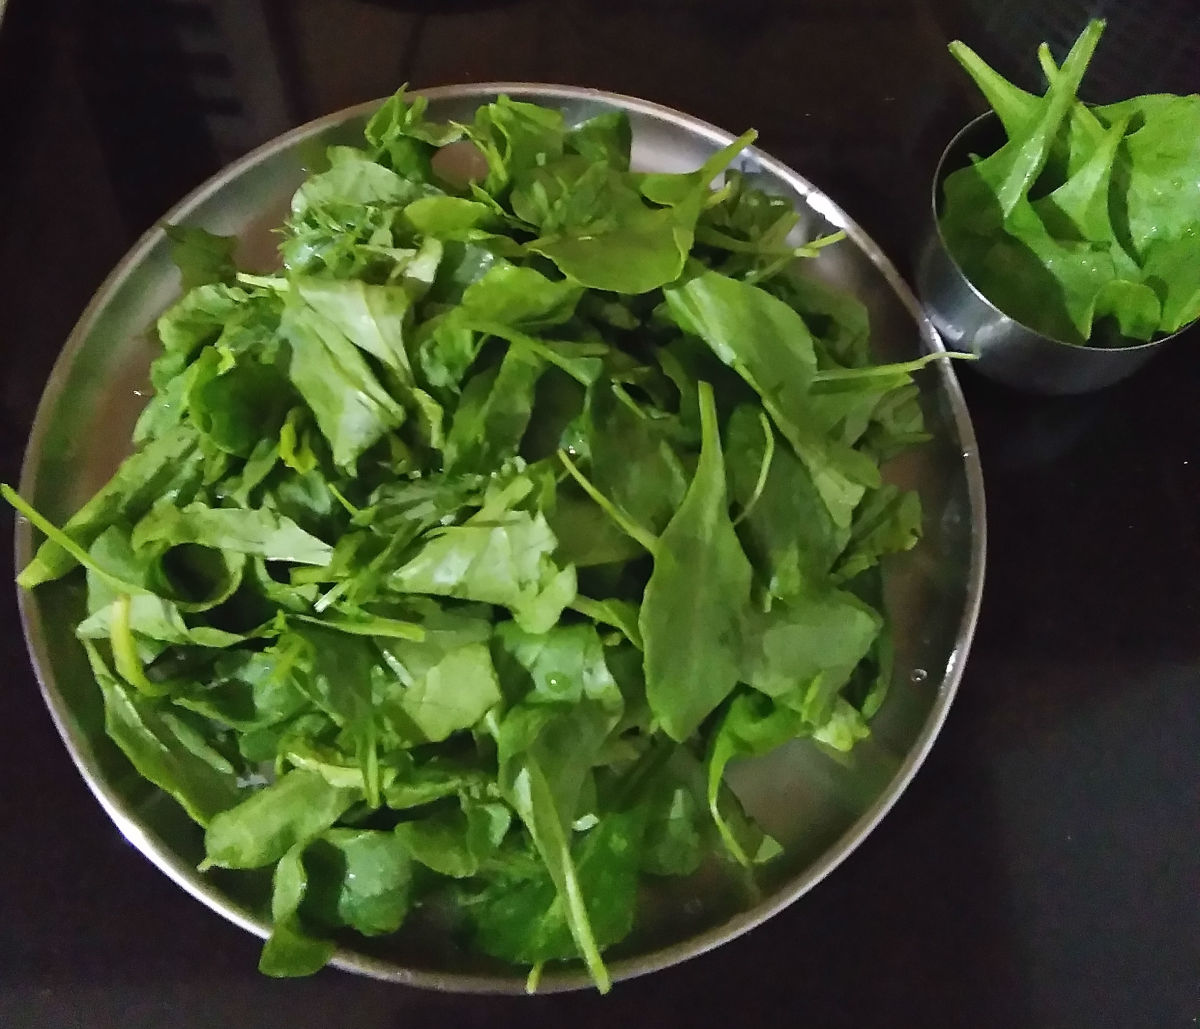 Step one: Wash the spinach. Finely chop 8 leaves. 